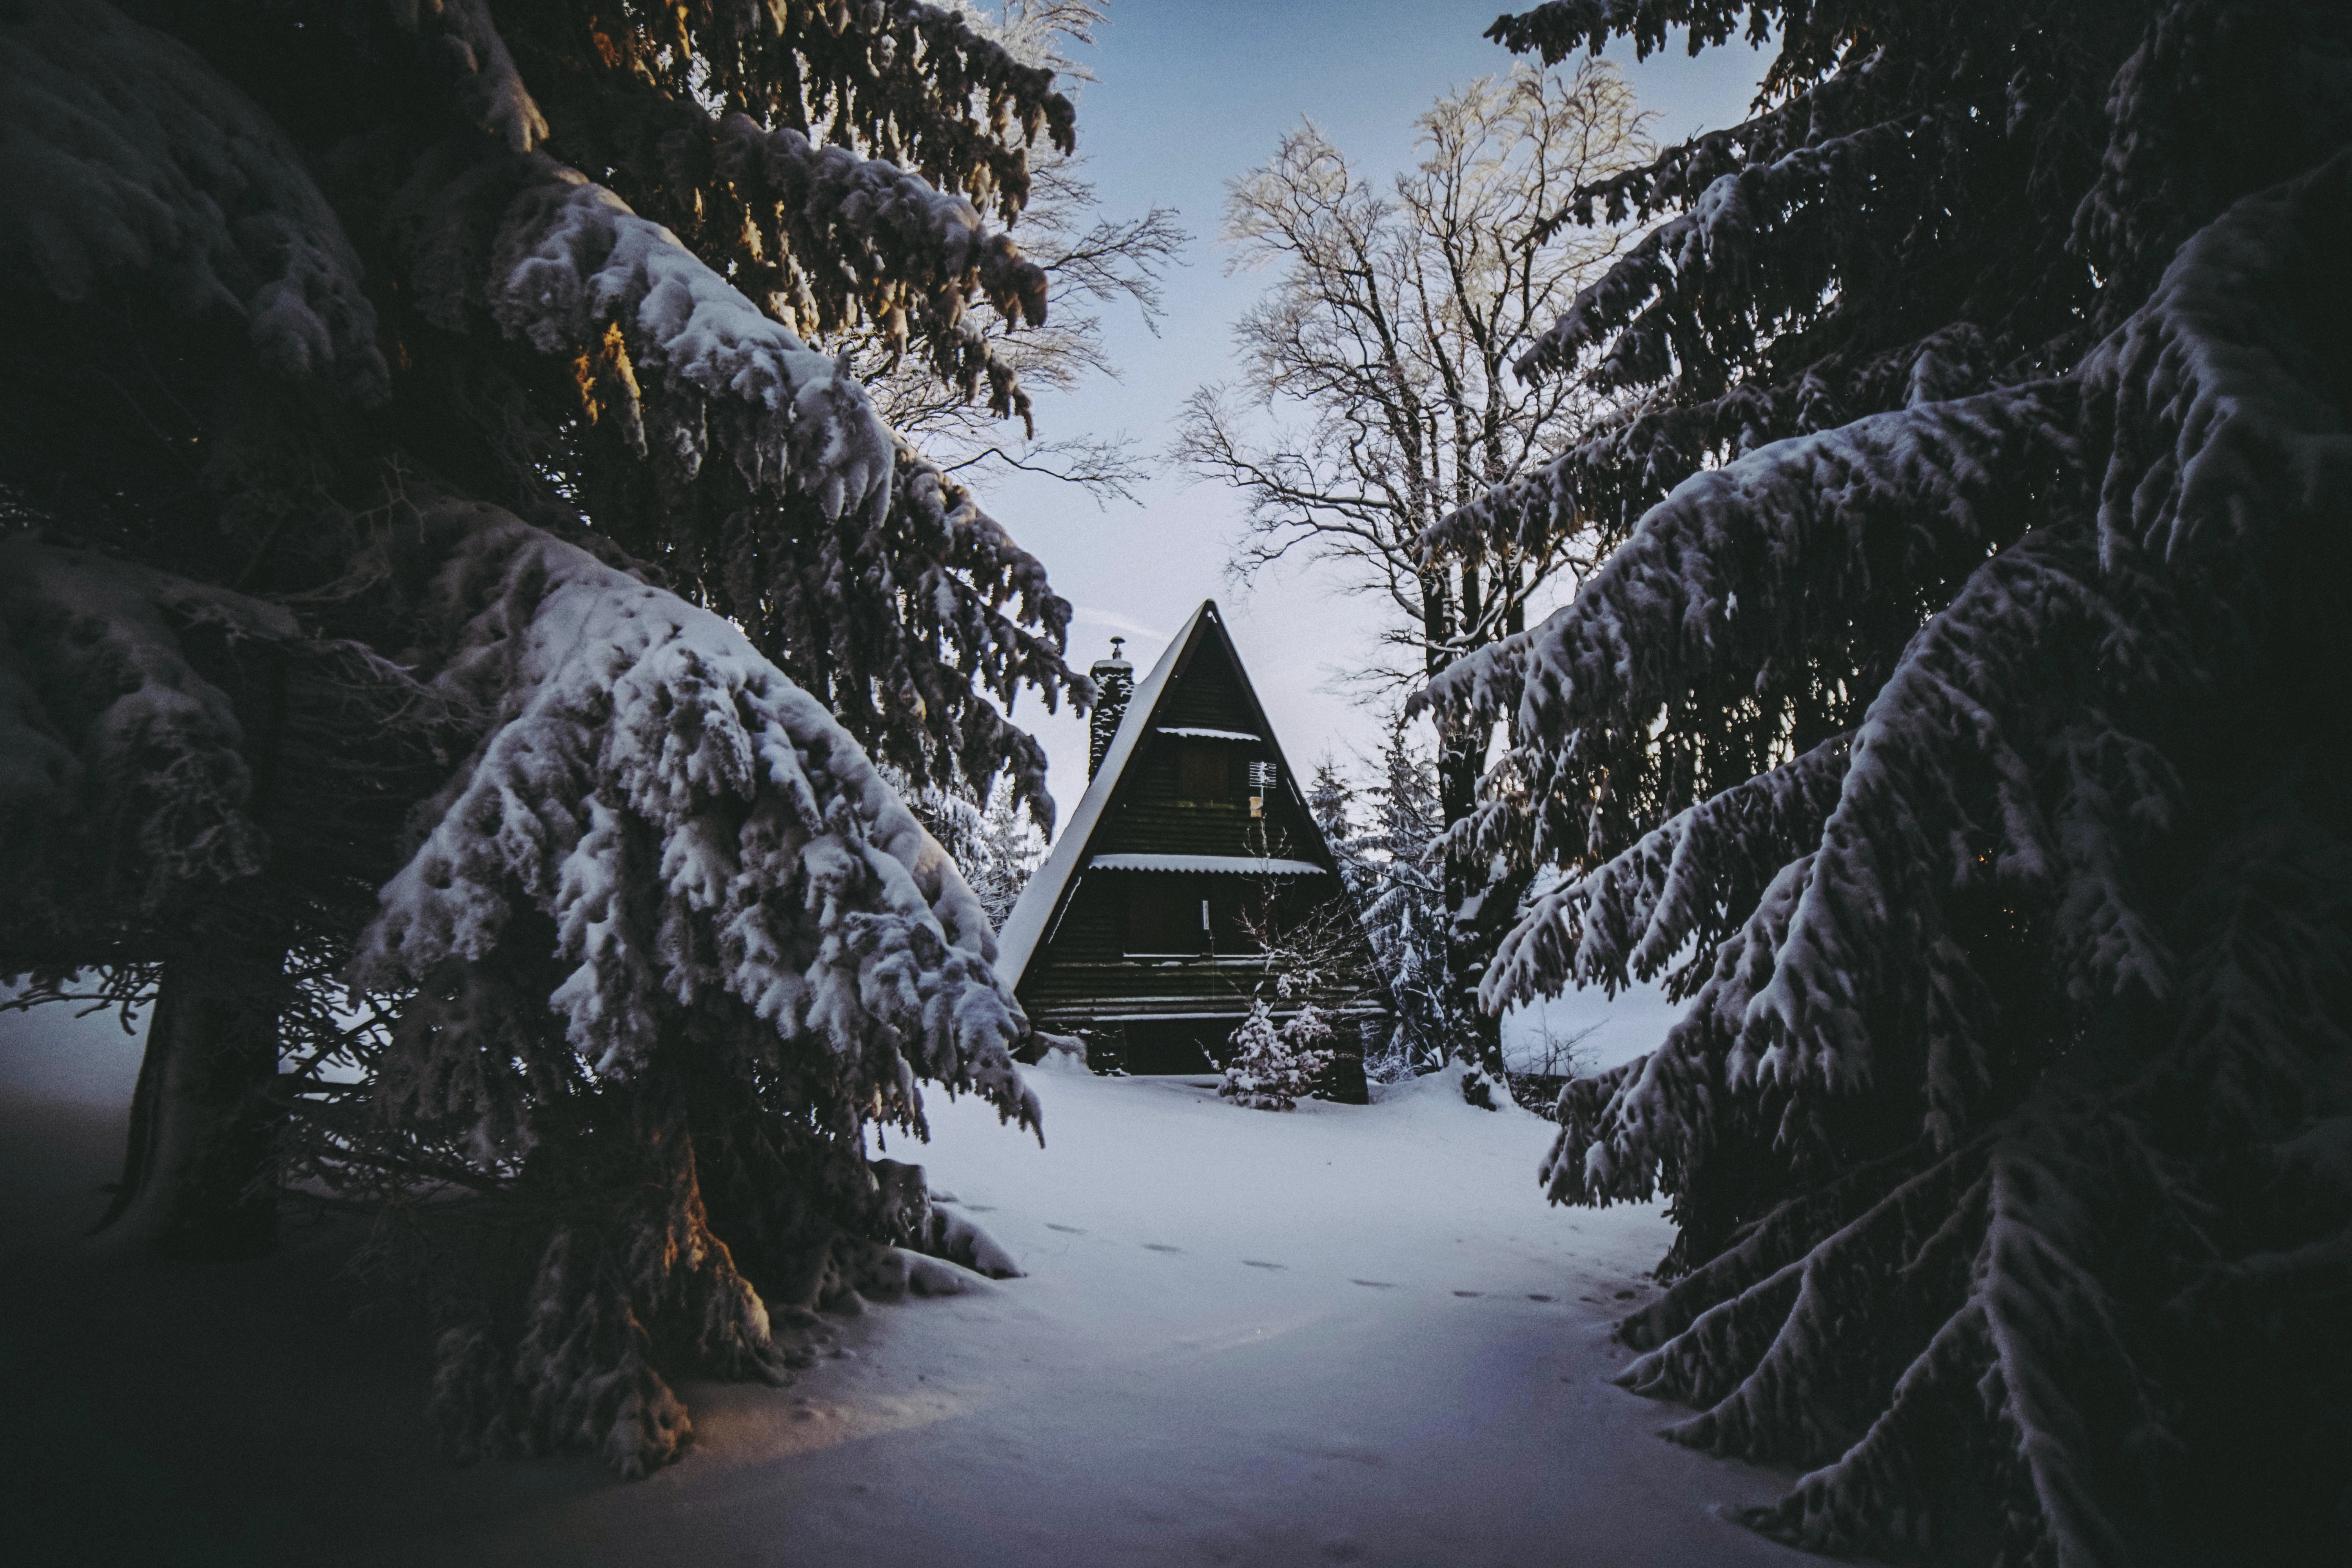 small house, winter, nature, snow, forest, lodge, coziness, comfort